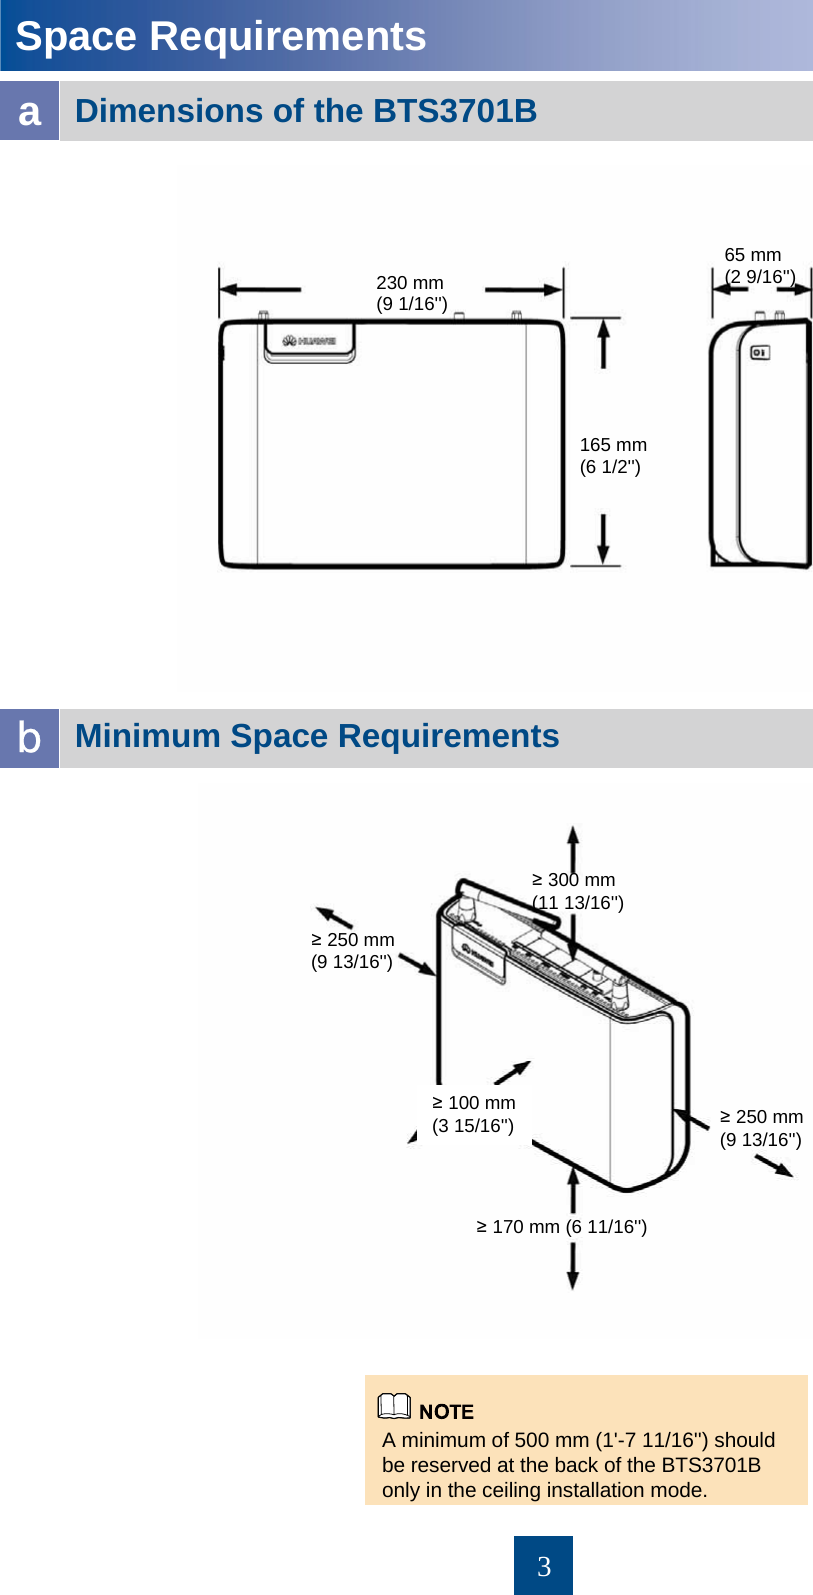 3Minimum Space Requirements Space Requirements aDimensions of the BTS3701B bA minimum of 500 mm (1&apos;-7 11/16&apos;&apos;) should be reserved at the back of the BTS3701B only in the ceiling installation mode. 230 mm (9 1/16&apos;&apos;)165 mm (6 1/2&apos;&apos;)65 mm (2 9/16&apos;&apos;)≥300 mm (11 13/16&apos;&apos;)≥170 mm (6 11/16&apos;&apos;)≥100 mm (3 15/16&apos;&apos;)≥250 mm (9 13/16&apos;&apos;)≥250 mm (9 13/16&apos;&apos;)